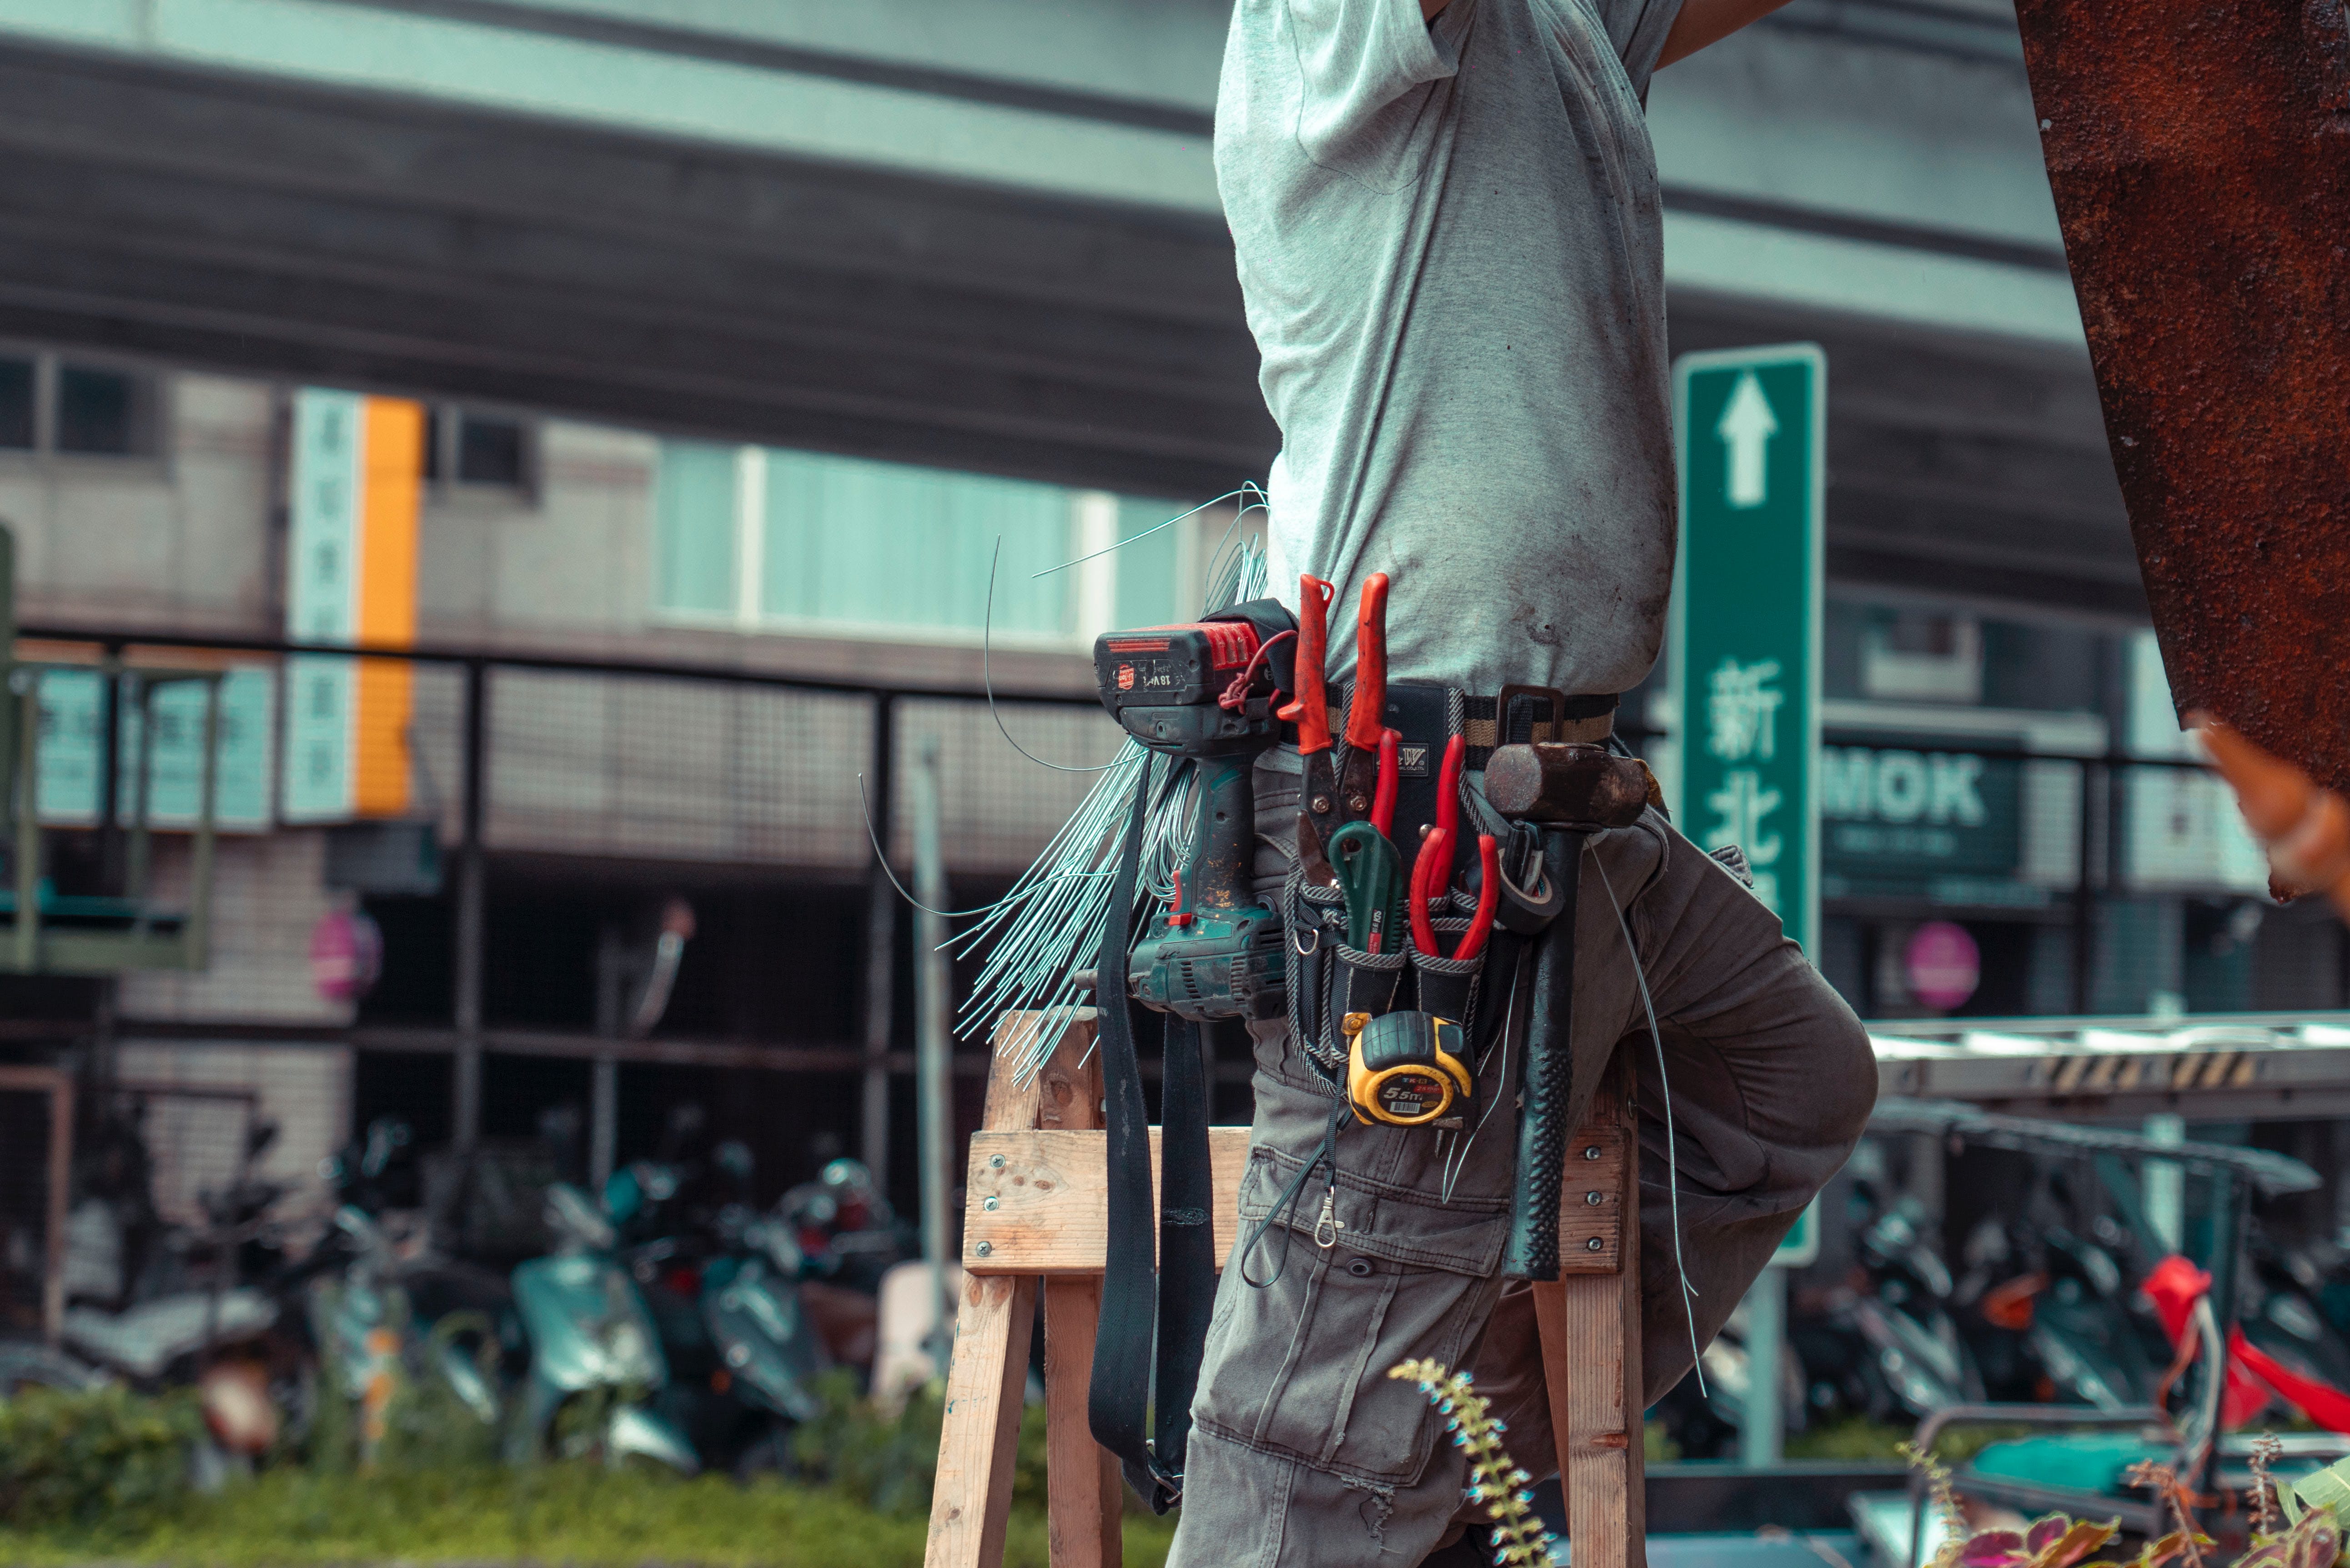 Worker on a stepladder with tools on a special belt